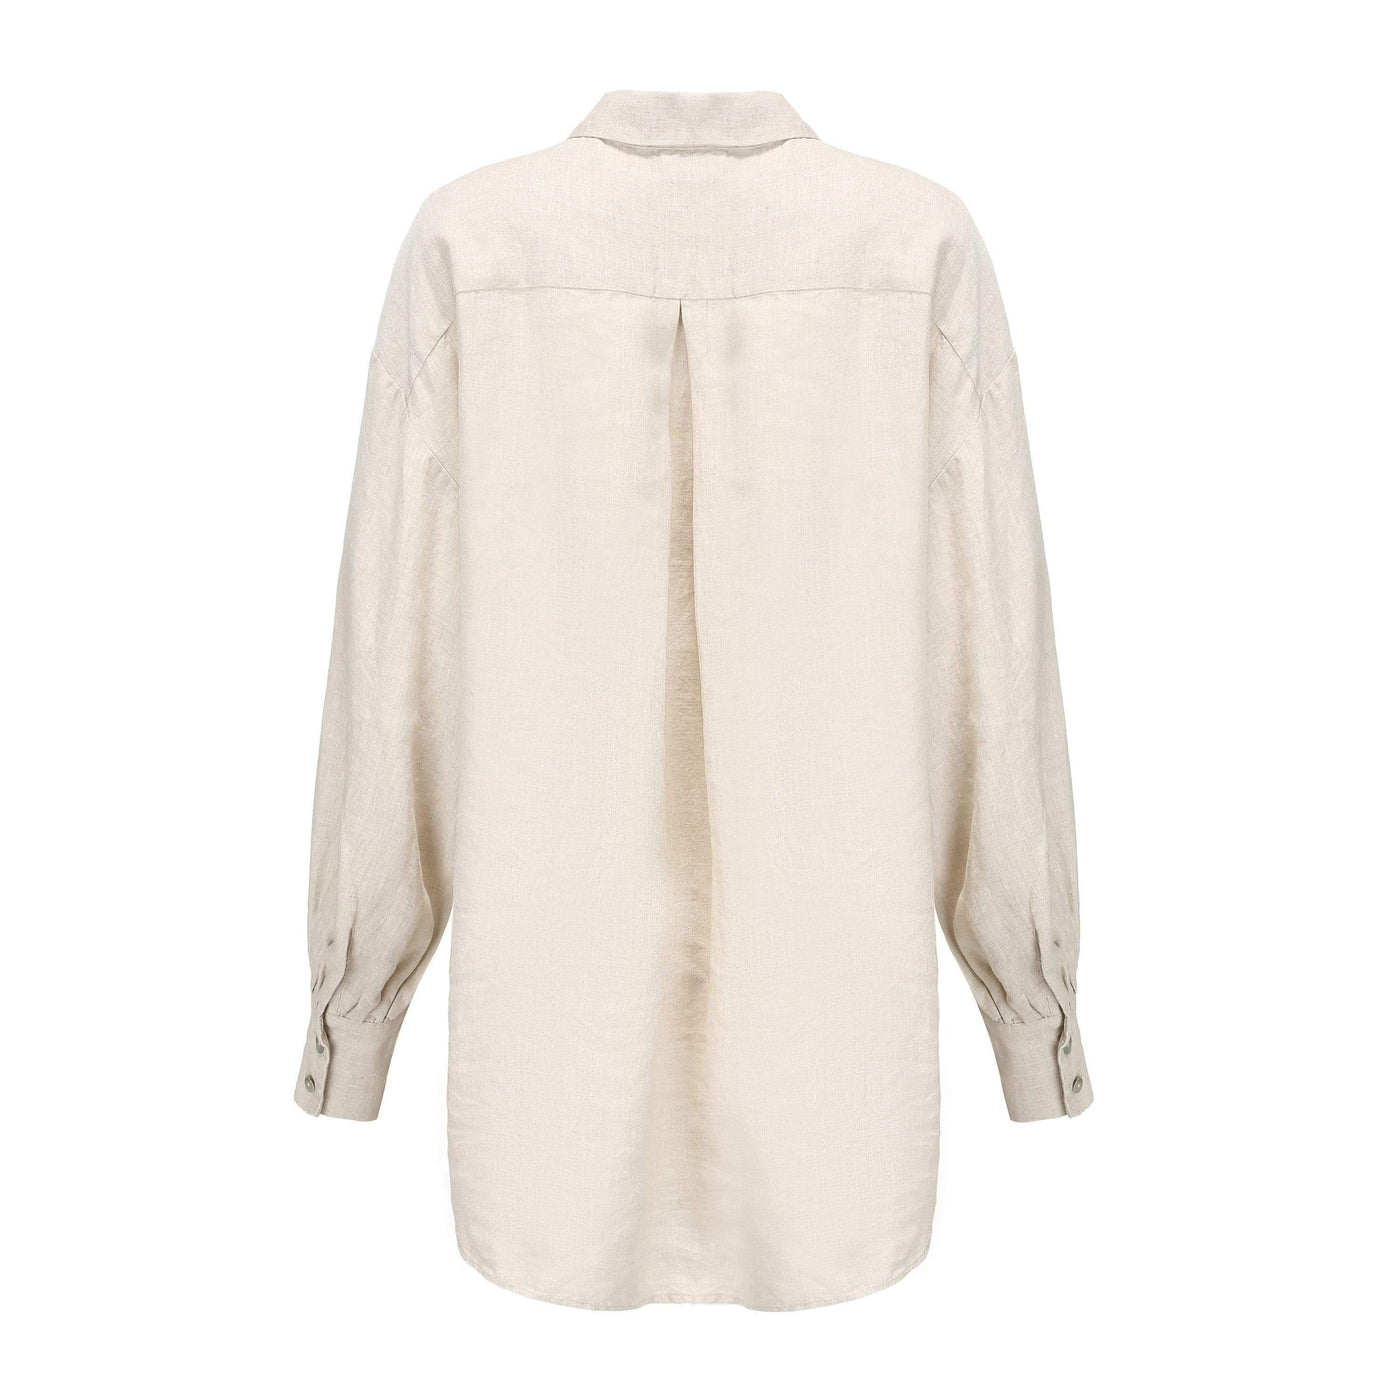 Lilly Pilly 100% organic linen Billie Shirt Dress in Oatmeal as 3D image showing back view